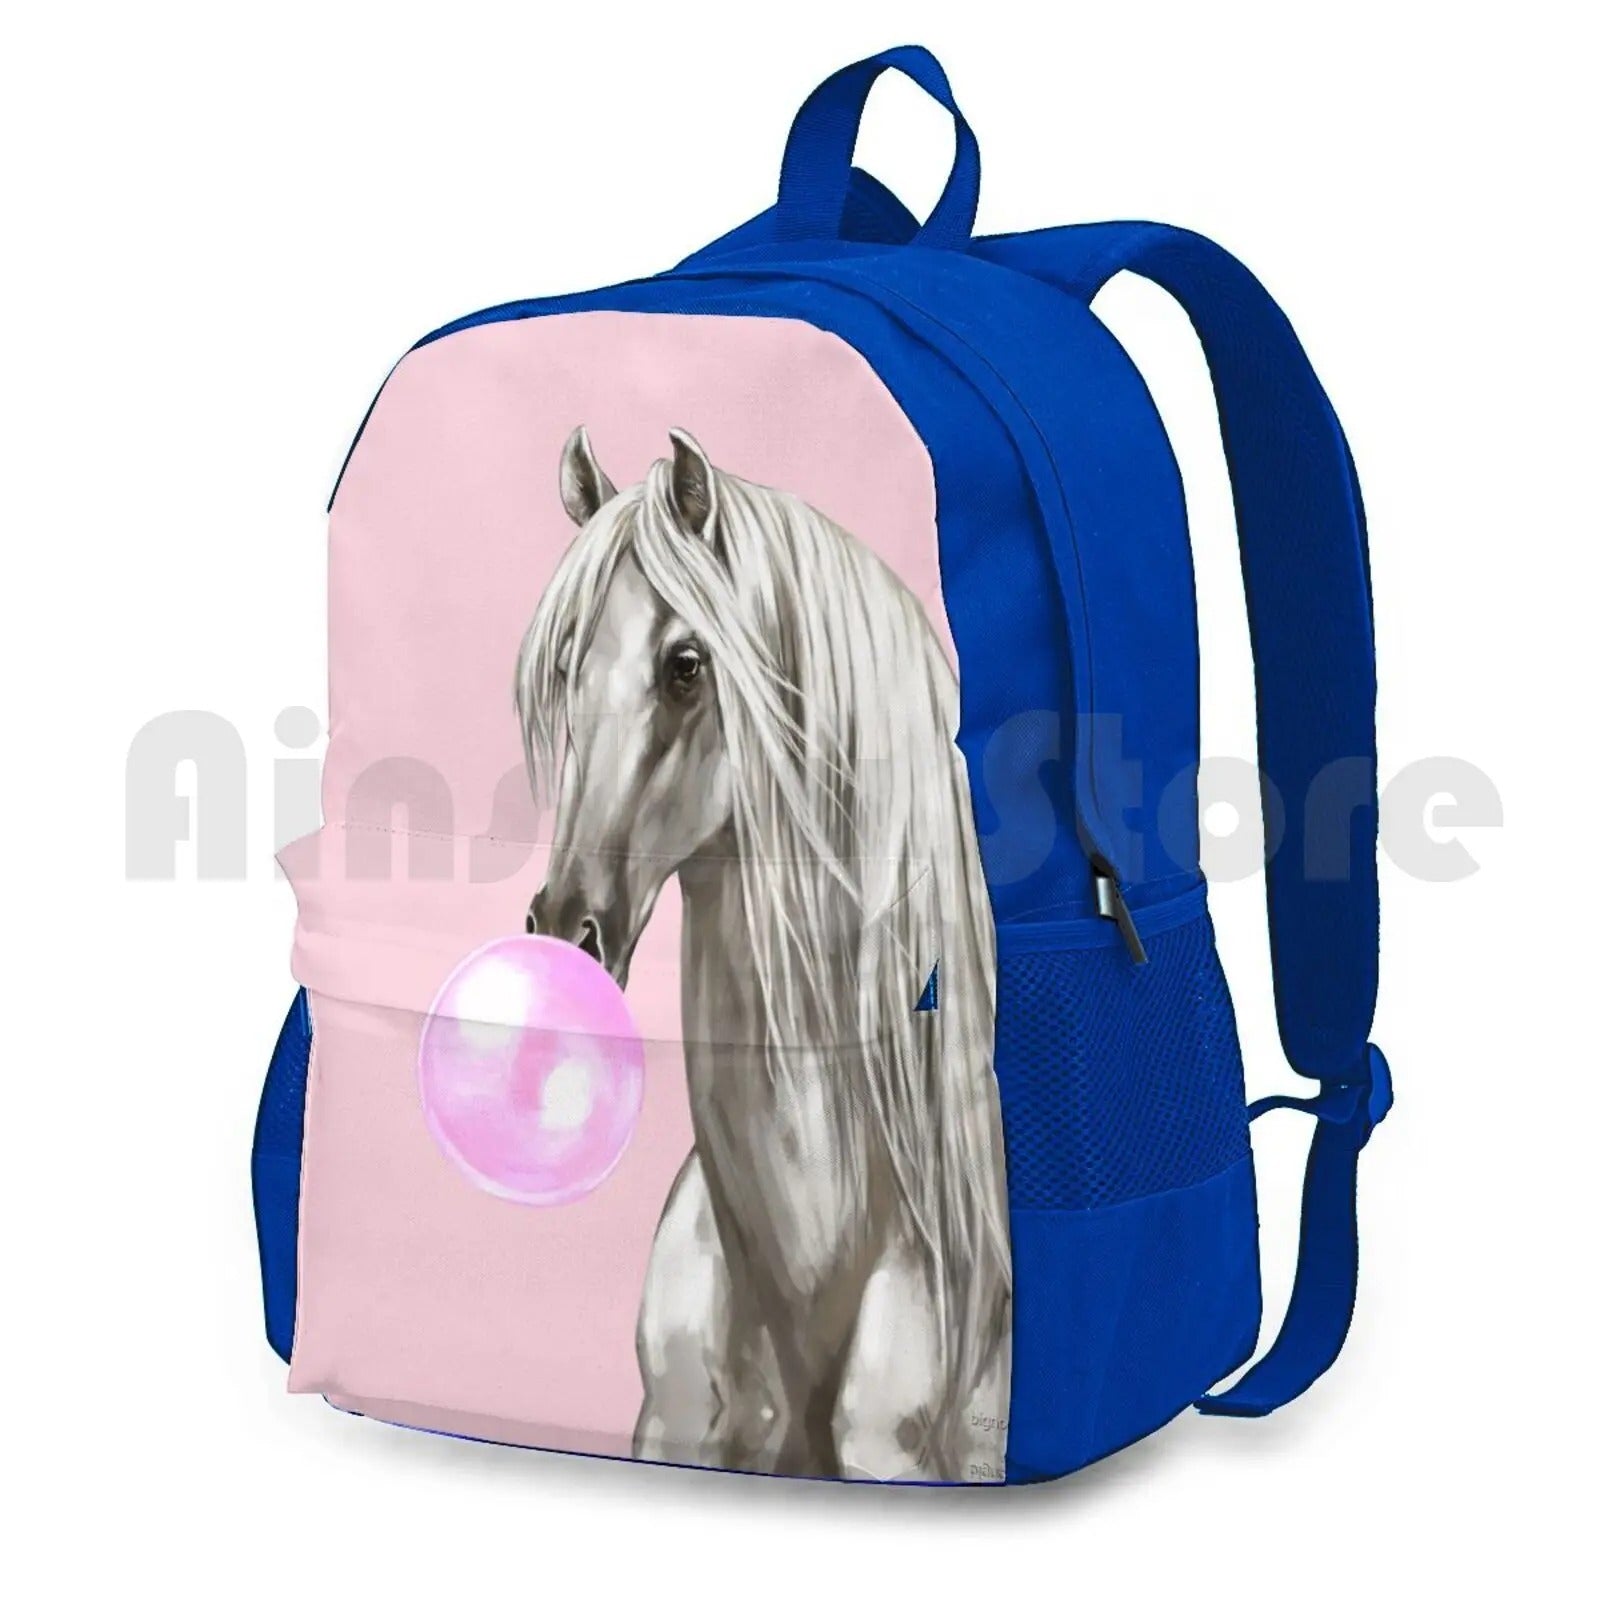 Backpack with Horse on It - Backpack - Blue